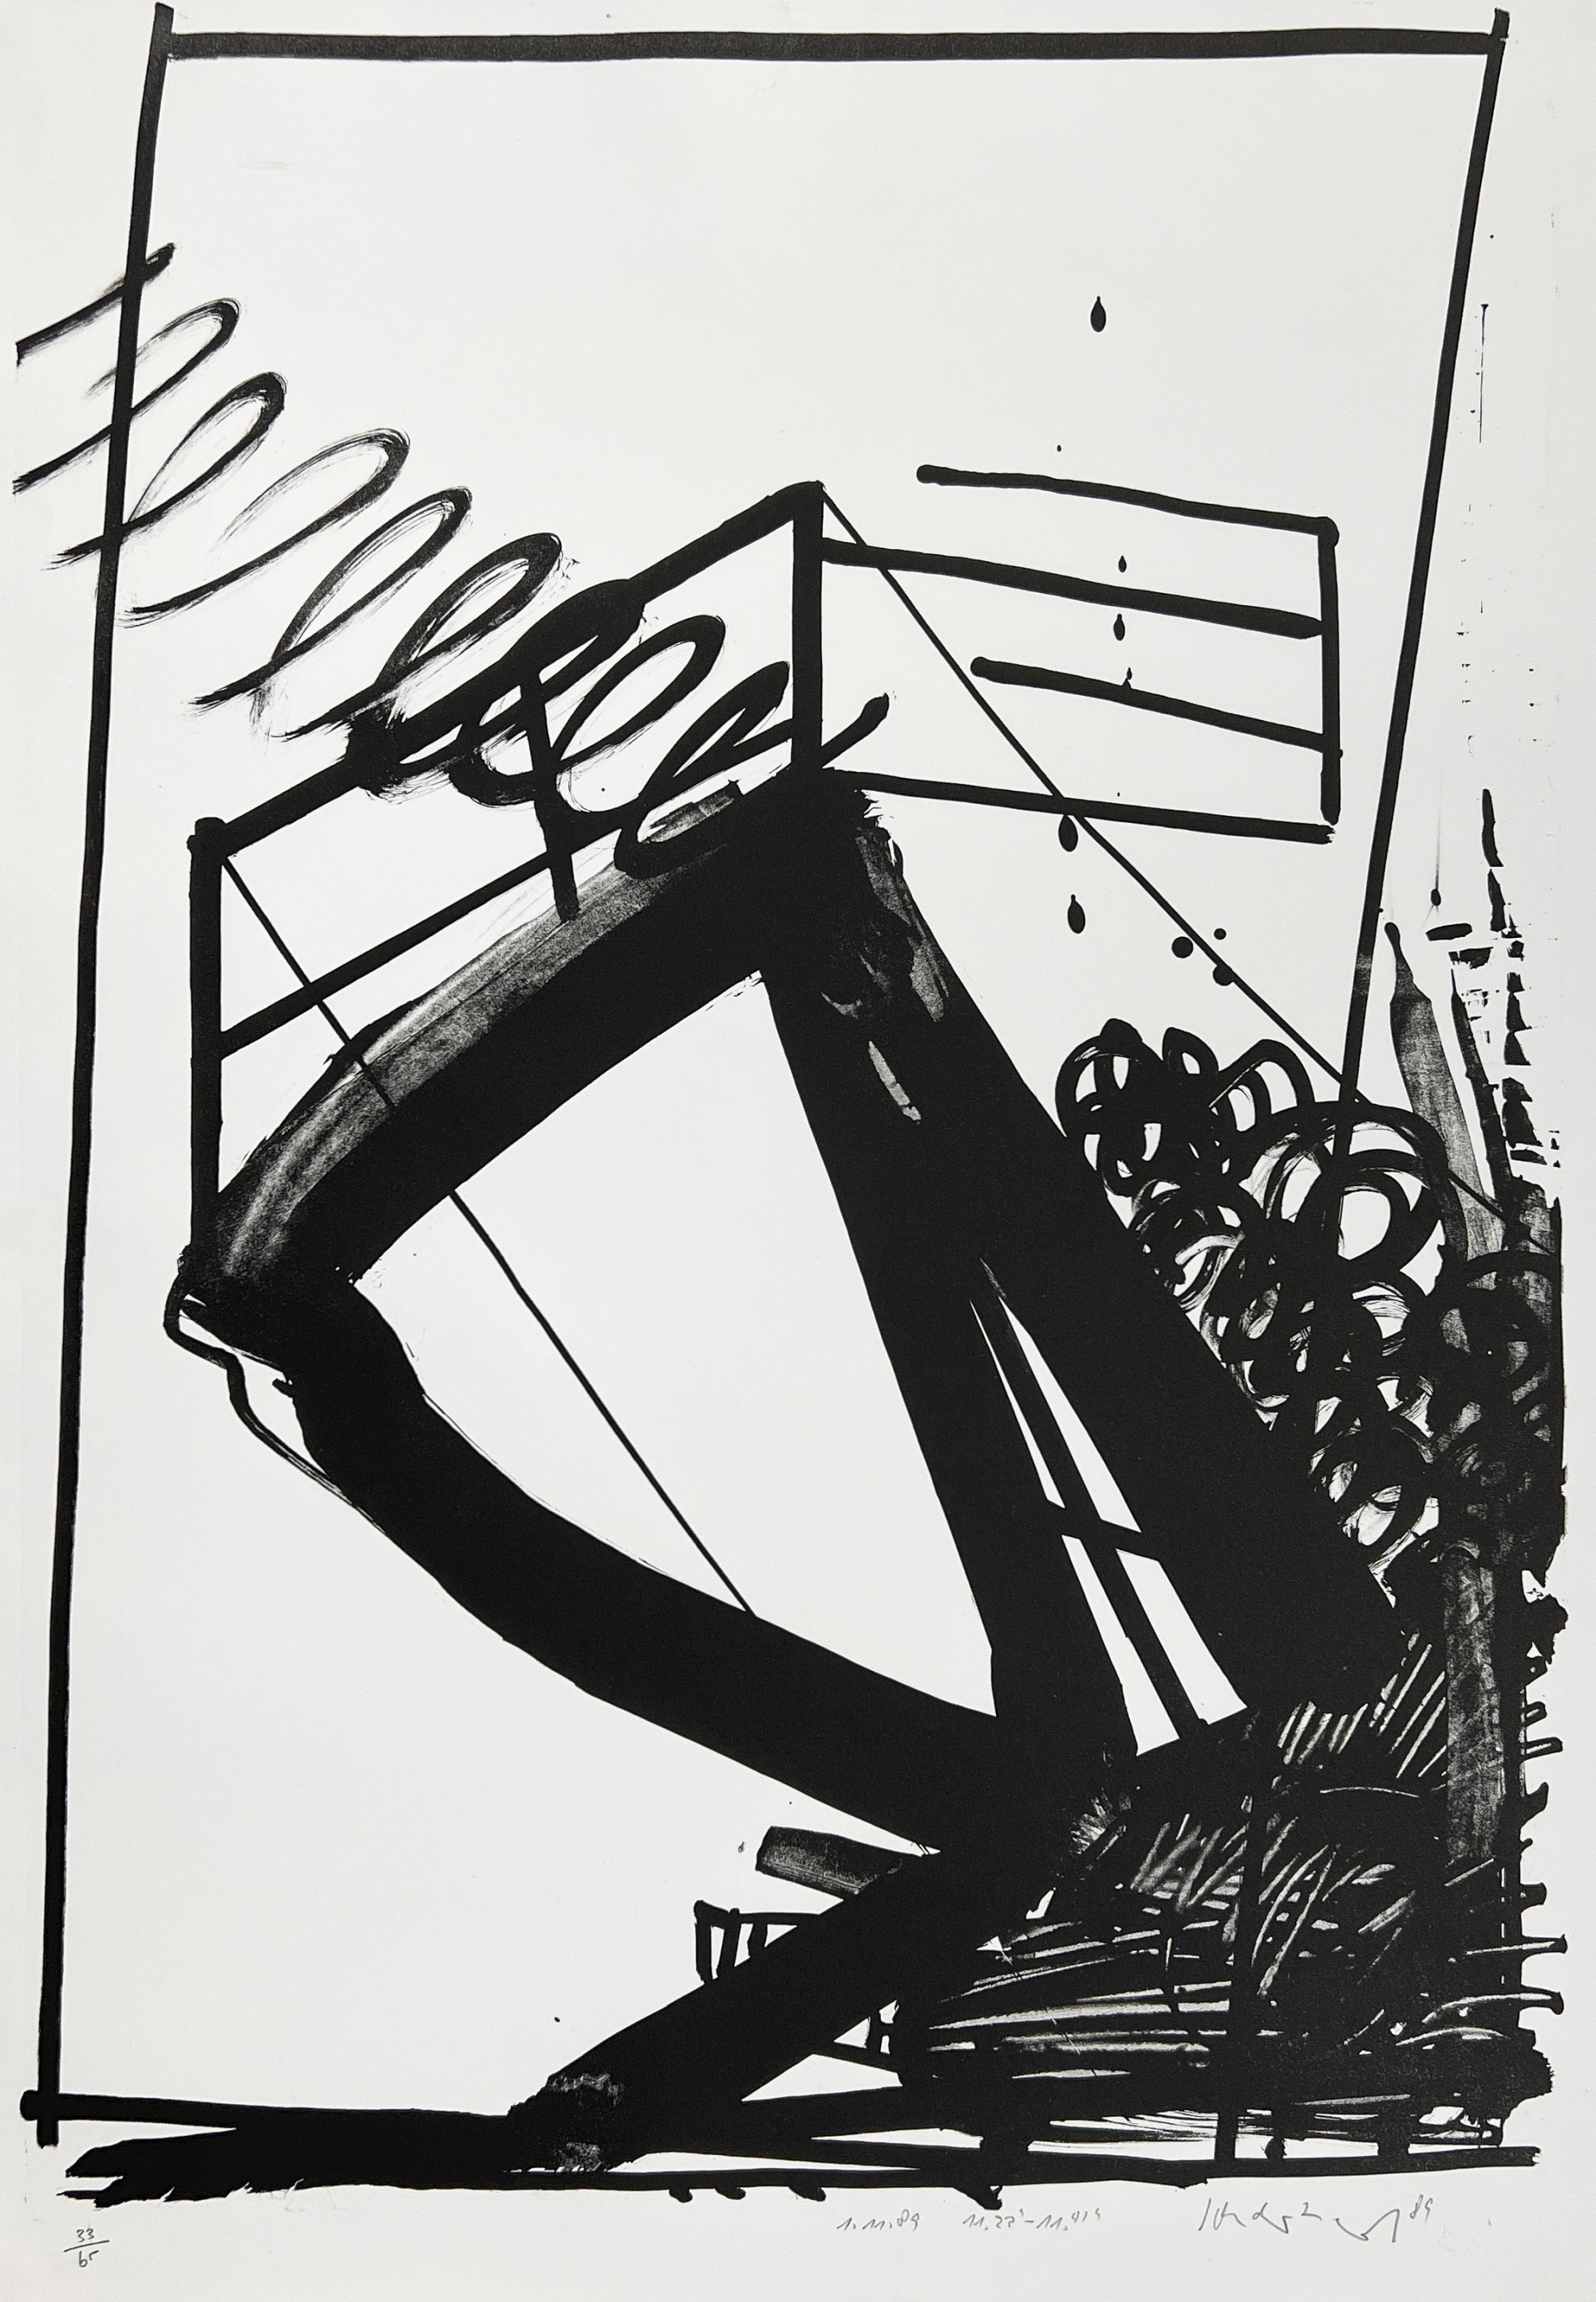 Artwork by Kurt Rudolf Hoffmann‏ Sonderborg, Untitled (Composition in Black) (1998), Made of lithograph